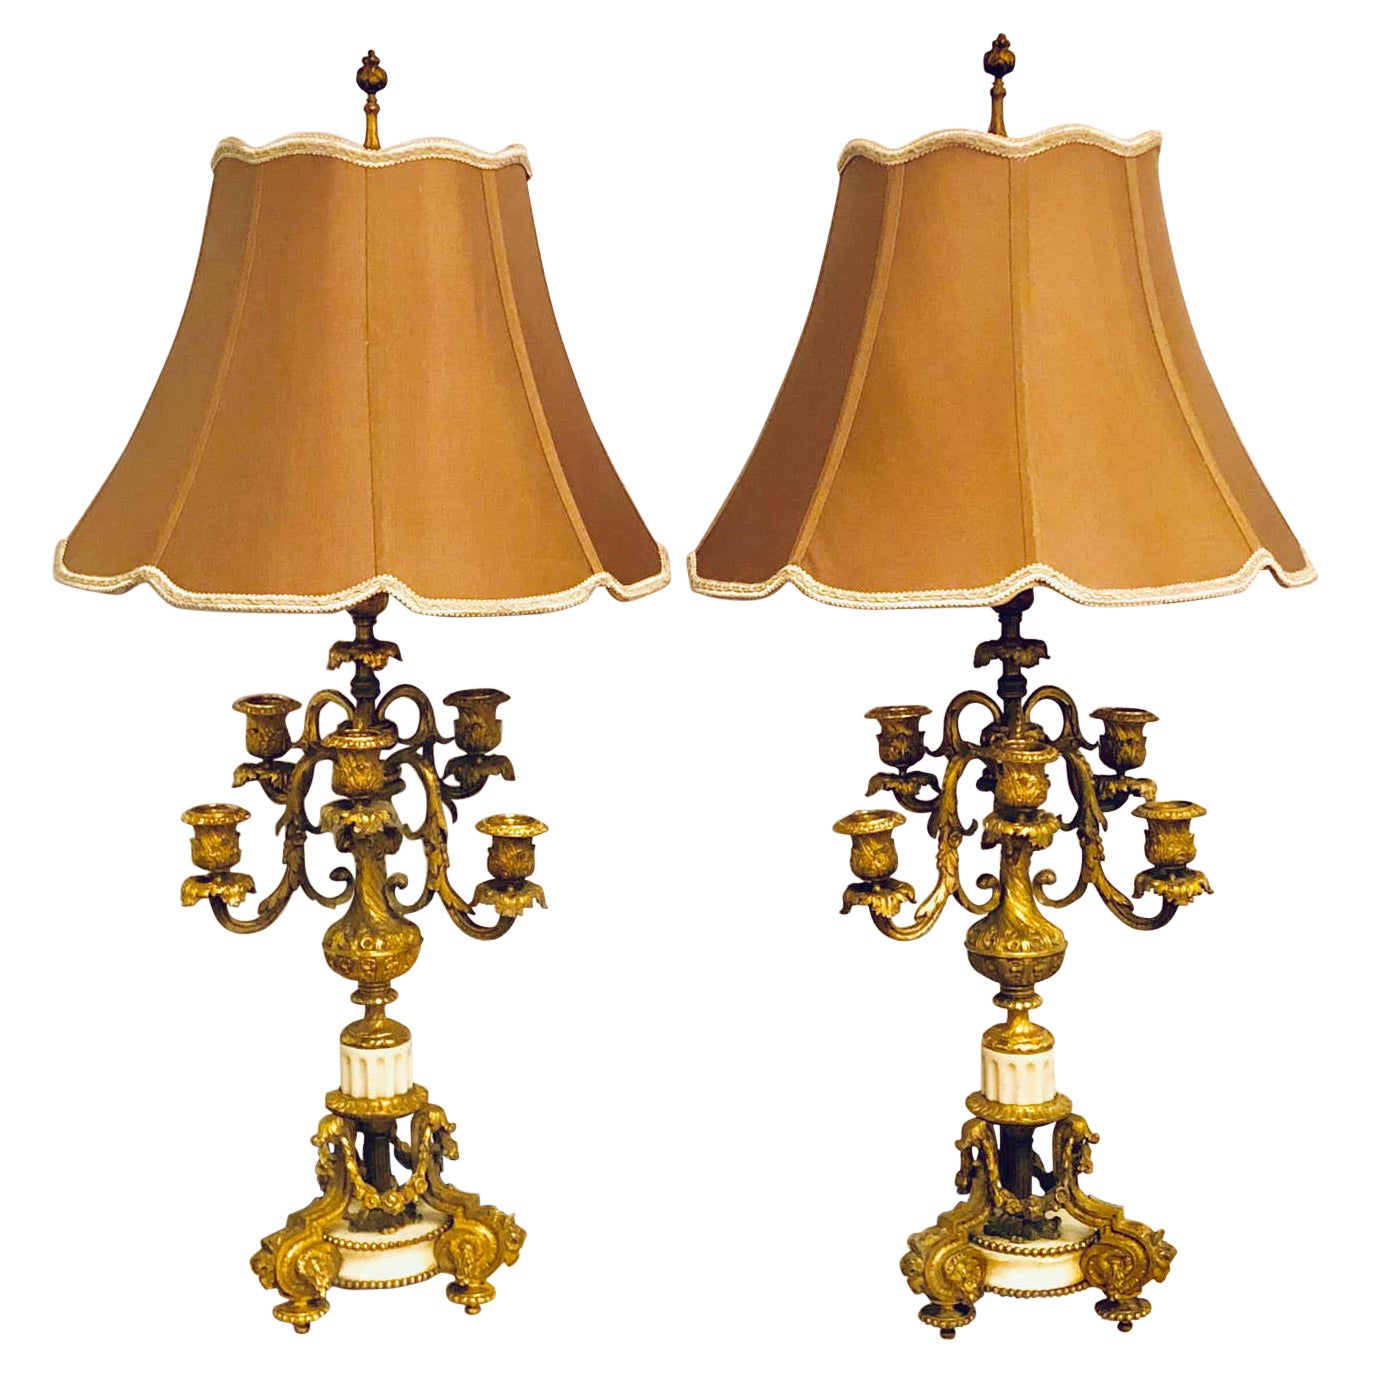 Pair of 19th Century Doré Bronze 7-Light Marble Base Candelabras Mounted as Lamp For Sale